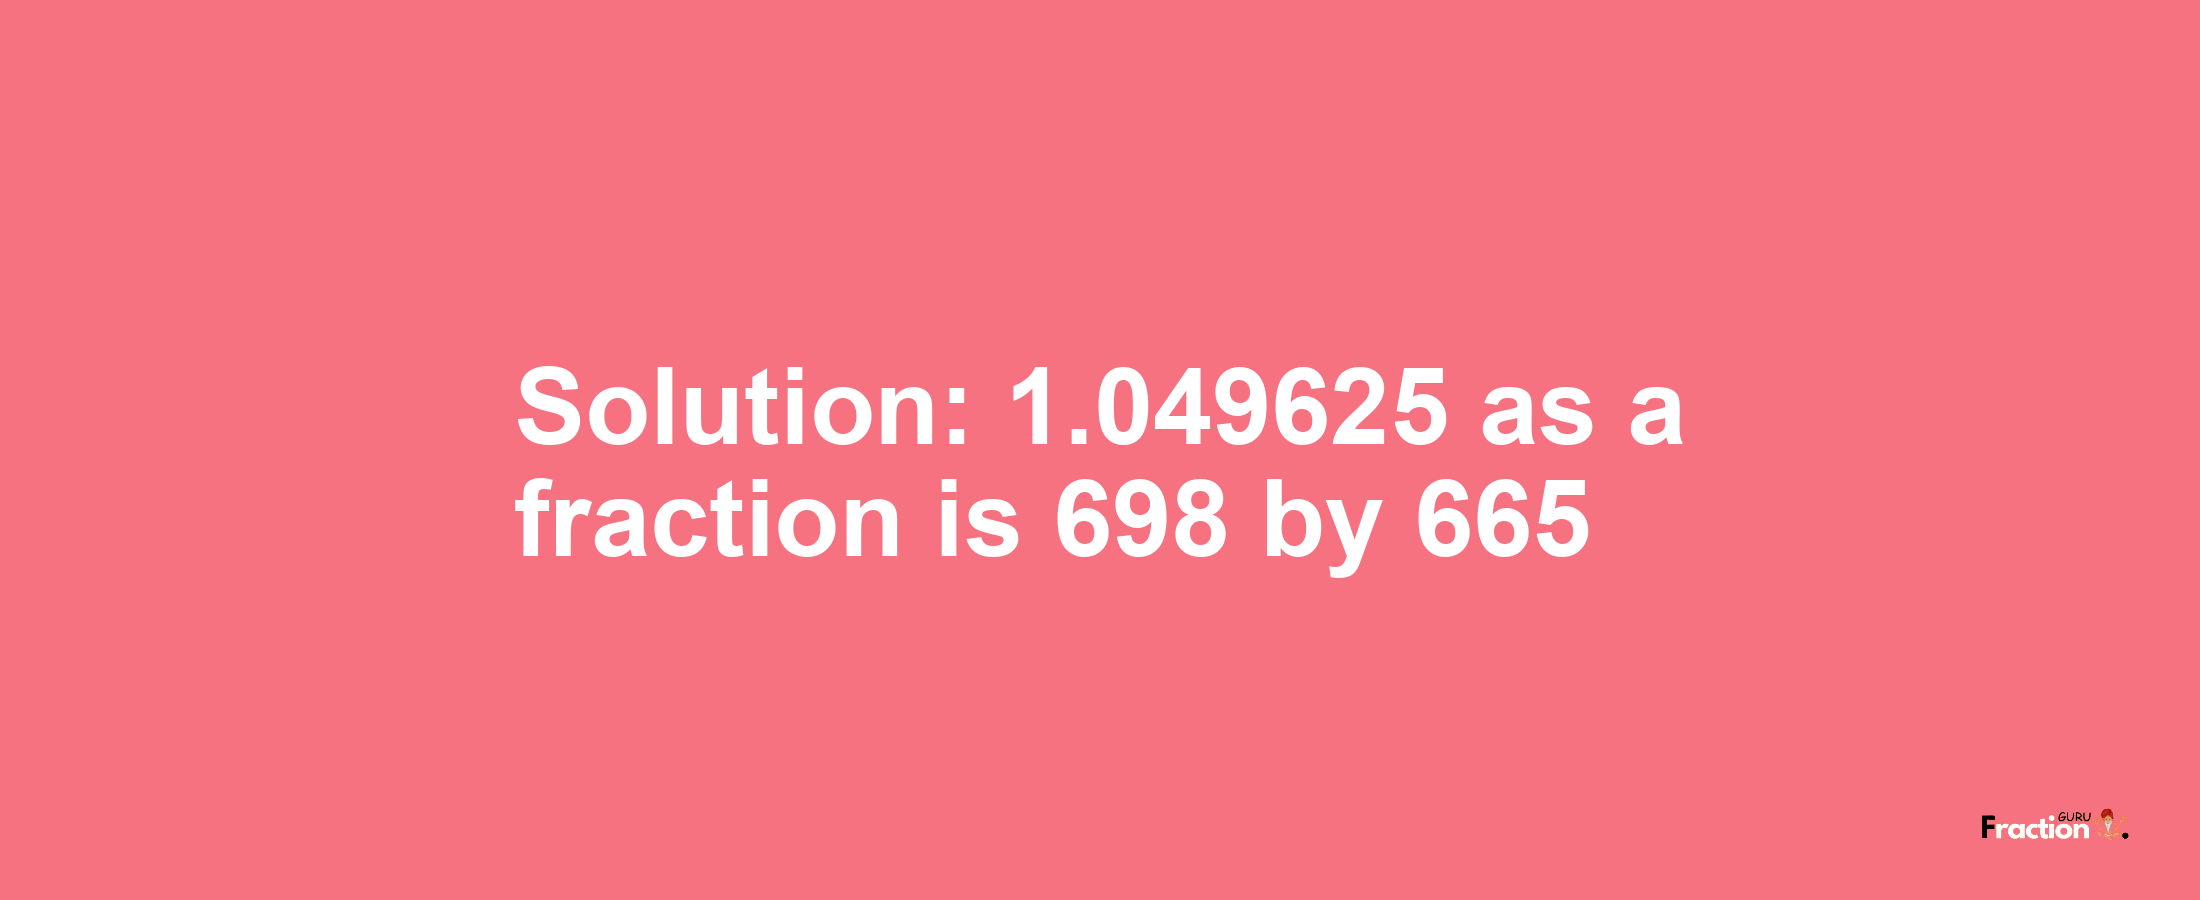 Solution:1.049625 as a fraction is 698/665